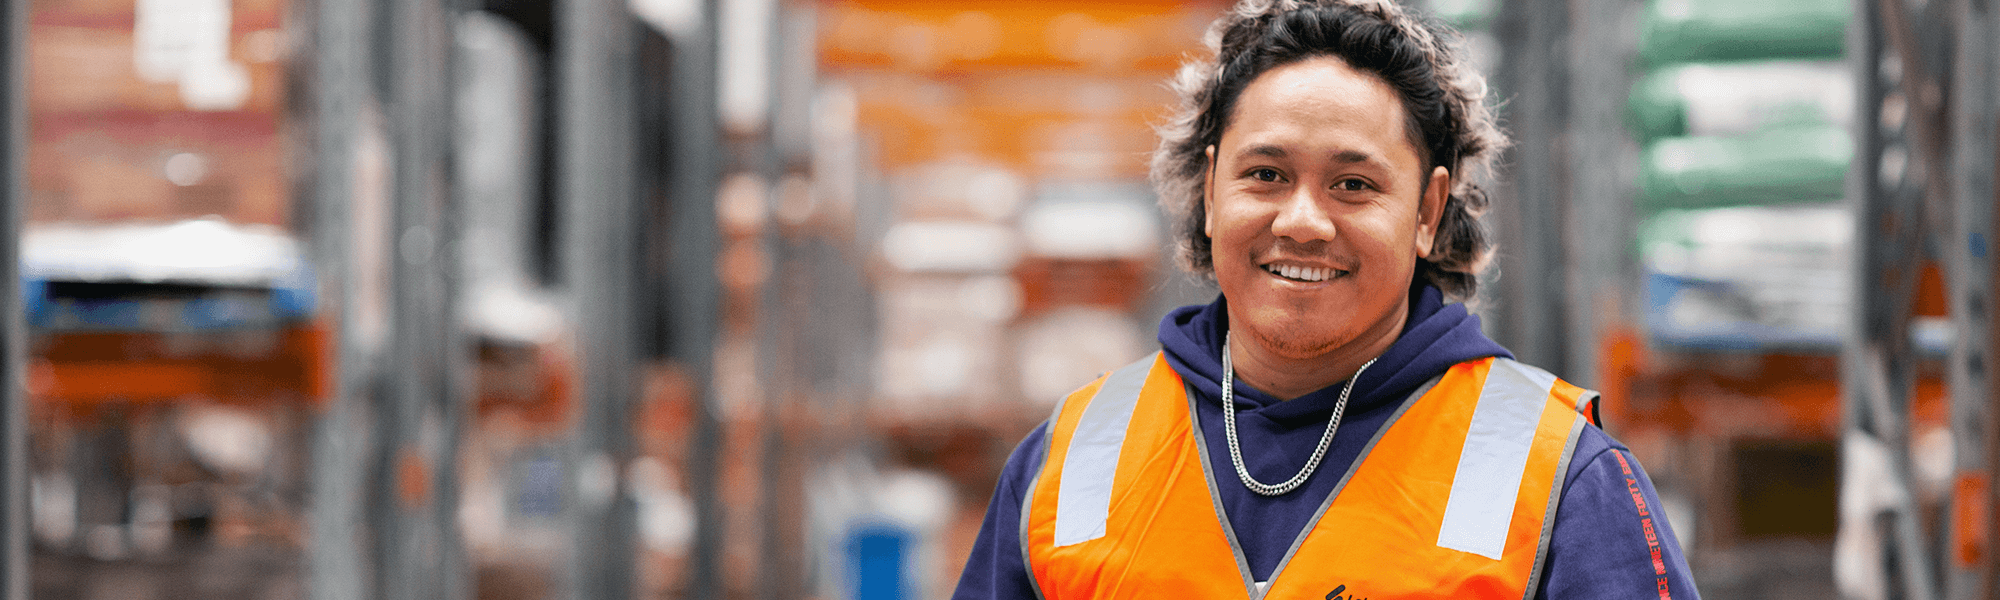 Labour Solutions Australia worker smiling